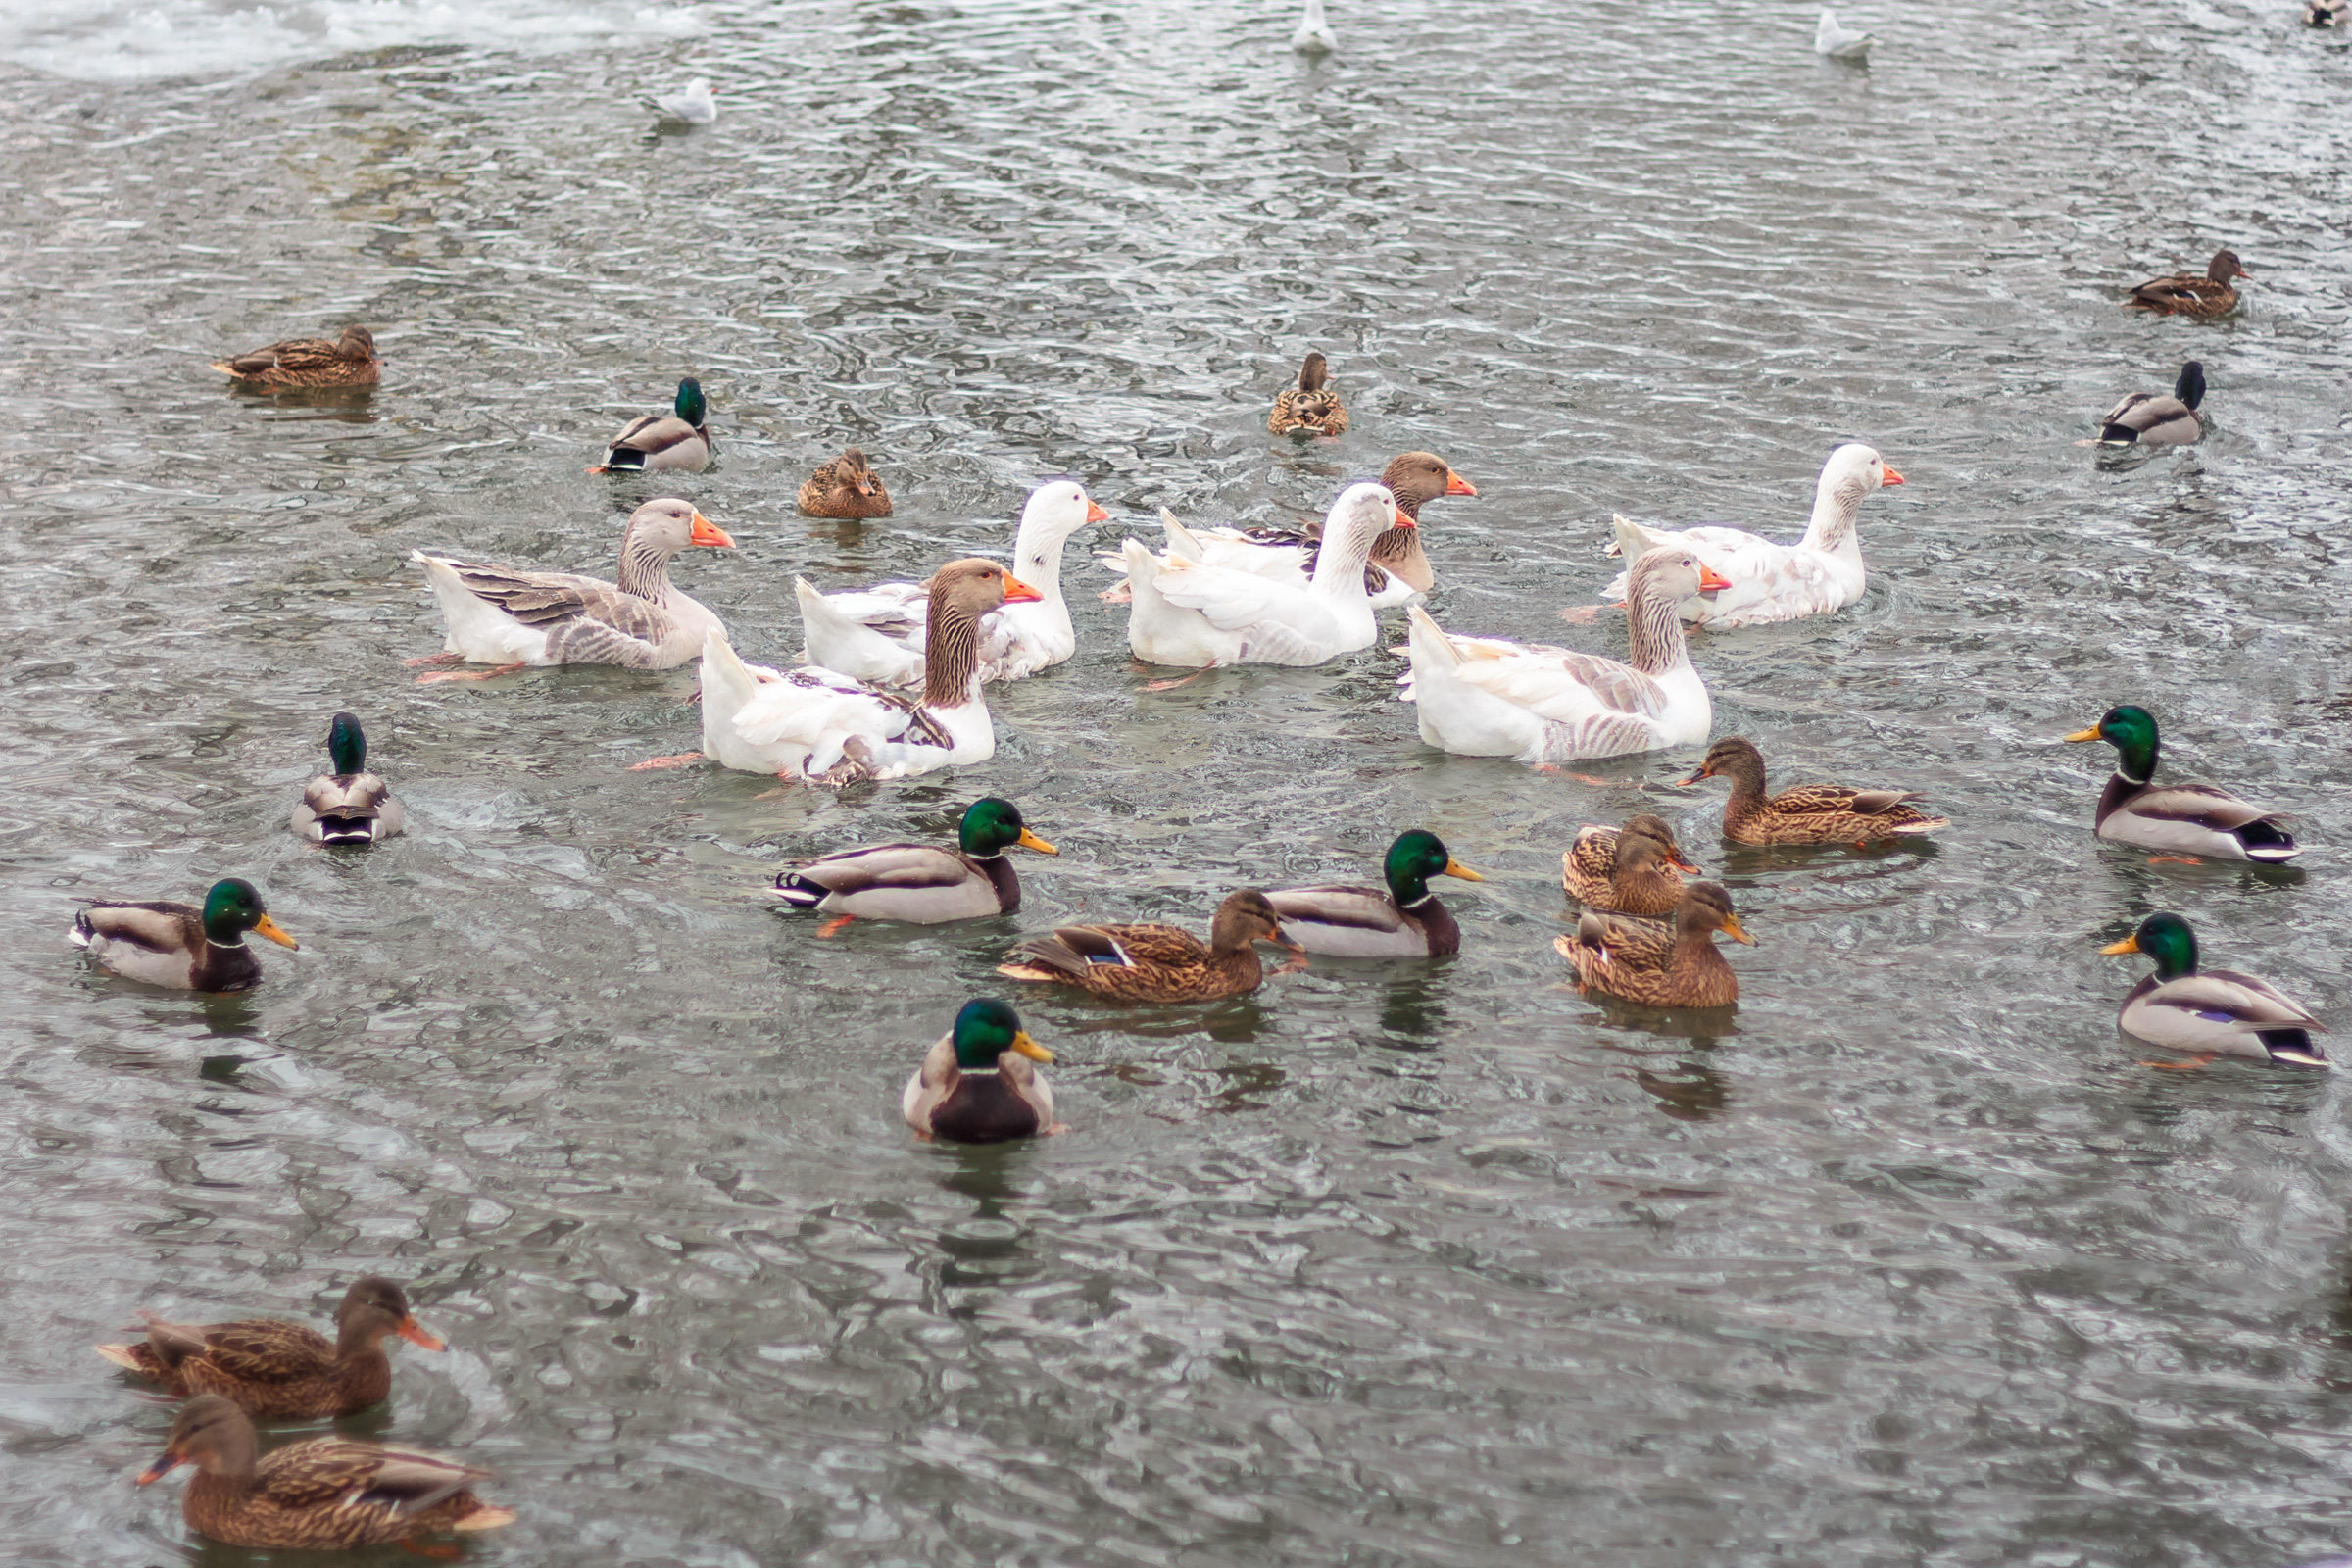 Ducks and geese in a park pond